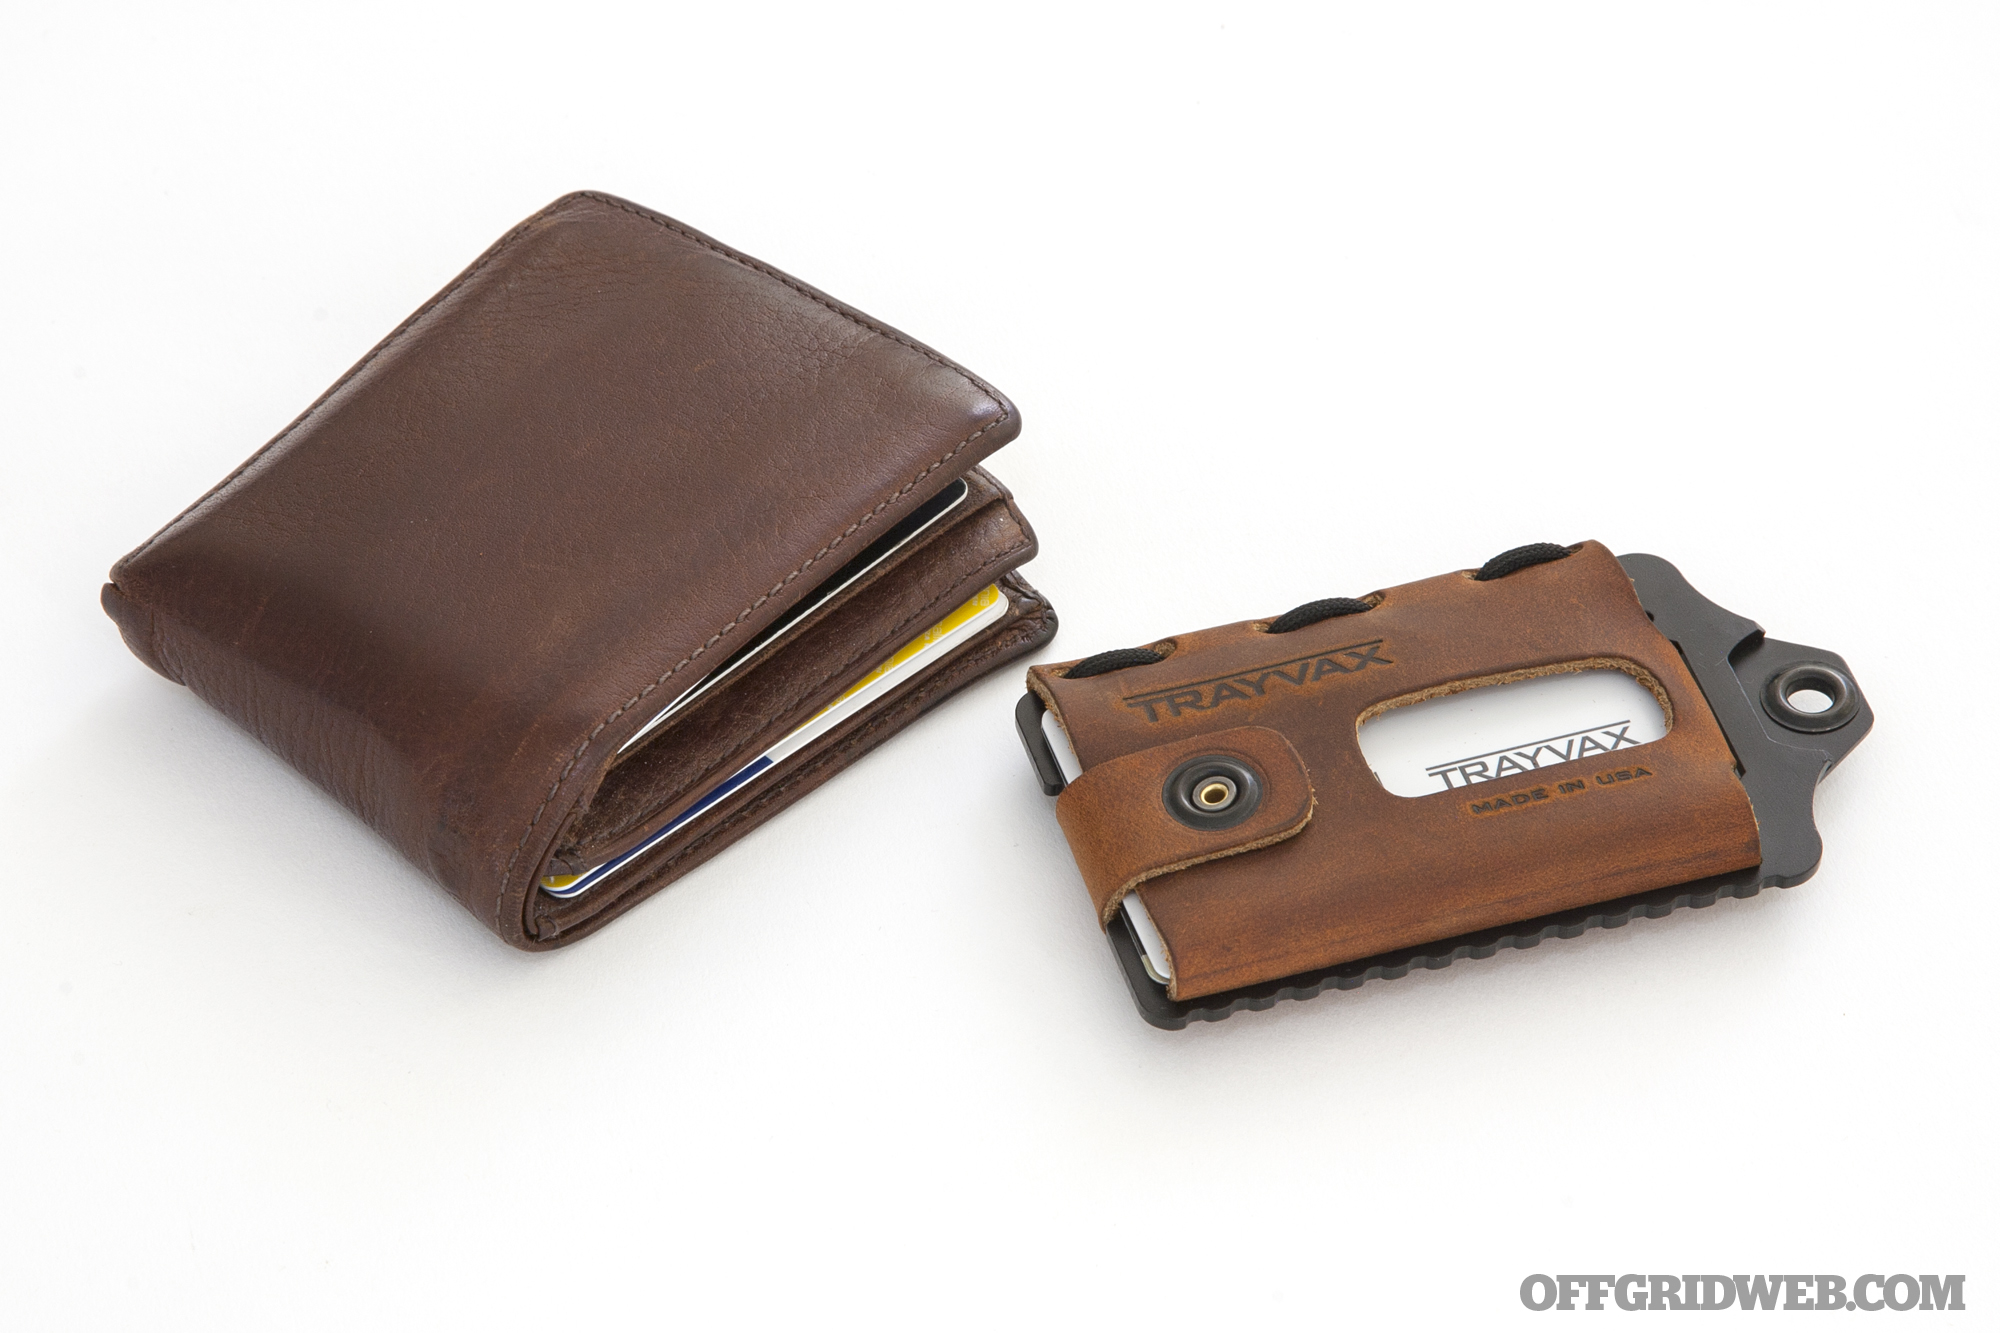 Trayvax Wallet Review 3 Minimalist Wallets for EDC 